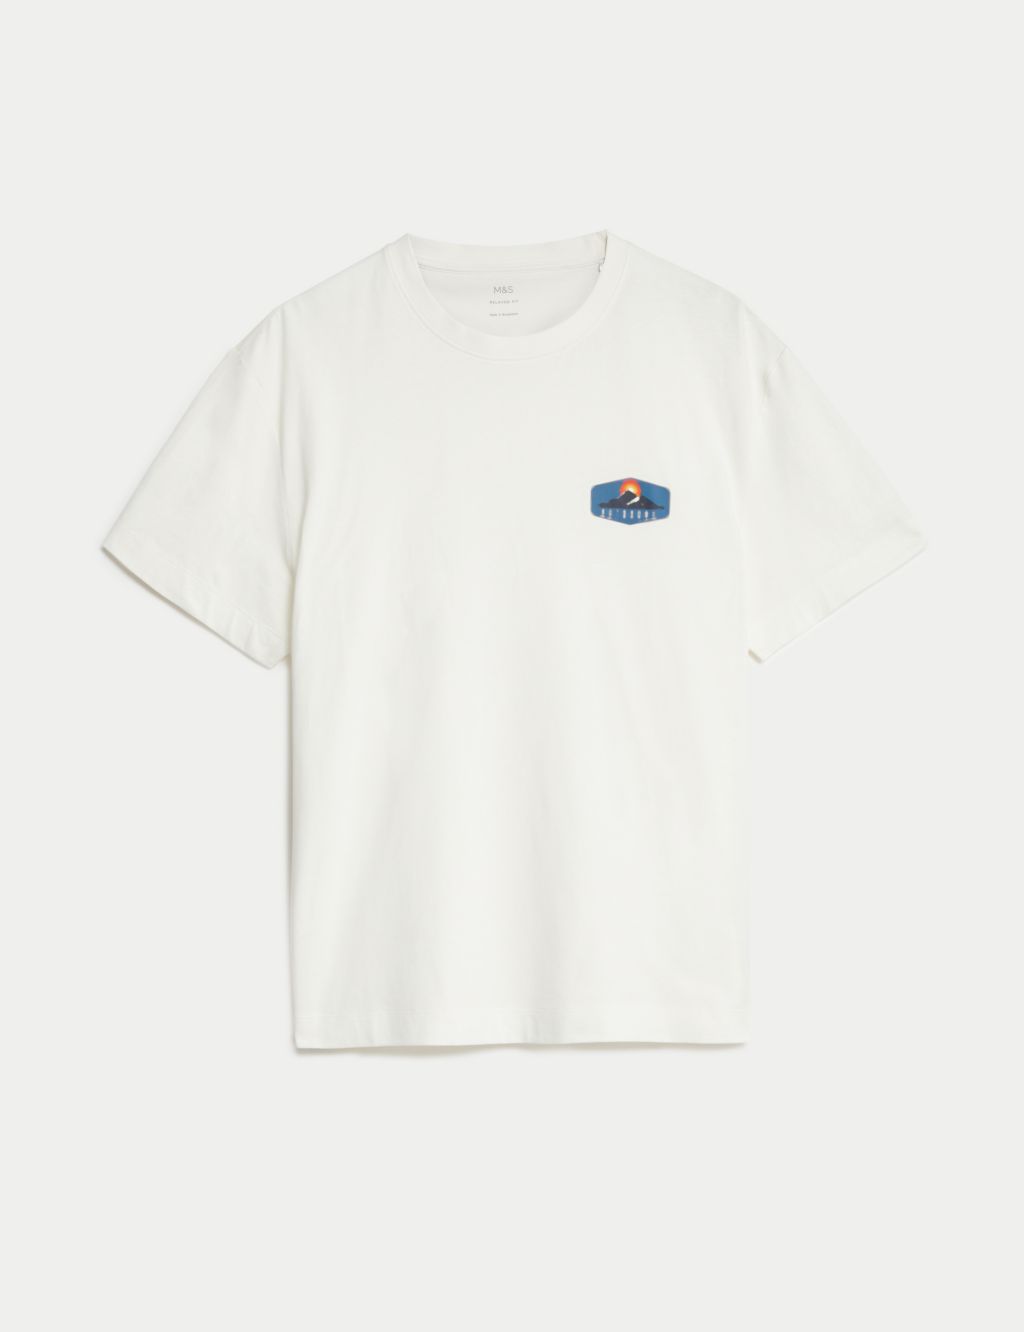 Pure Cotton Mountain Graphic T-Shirt image 2